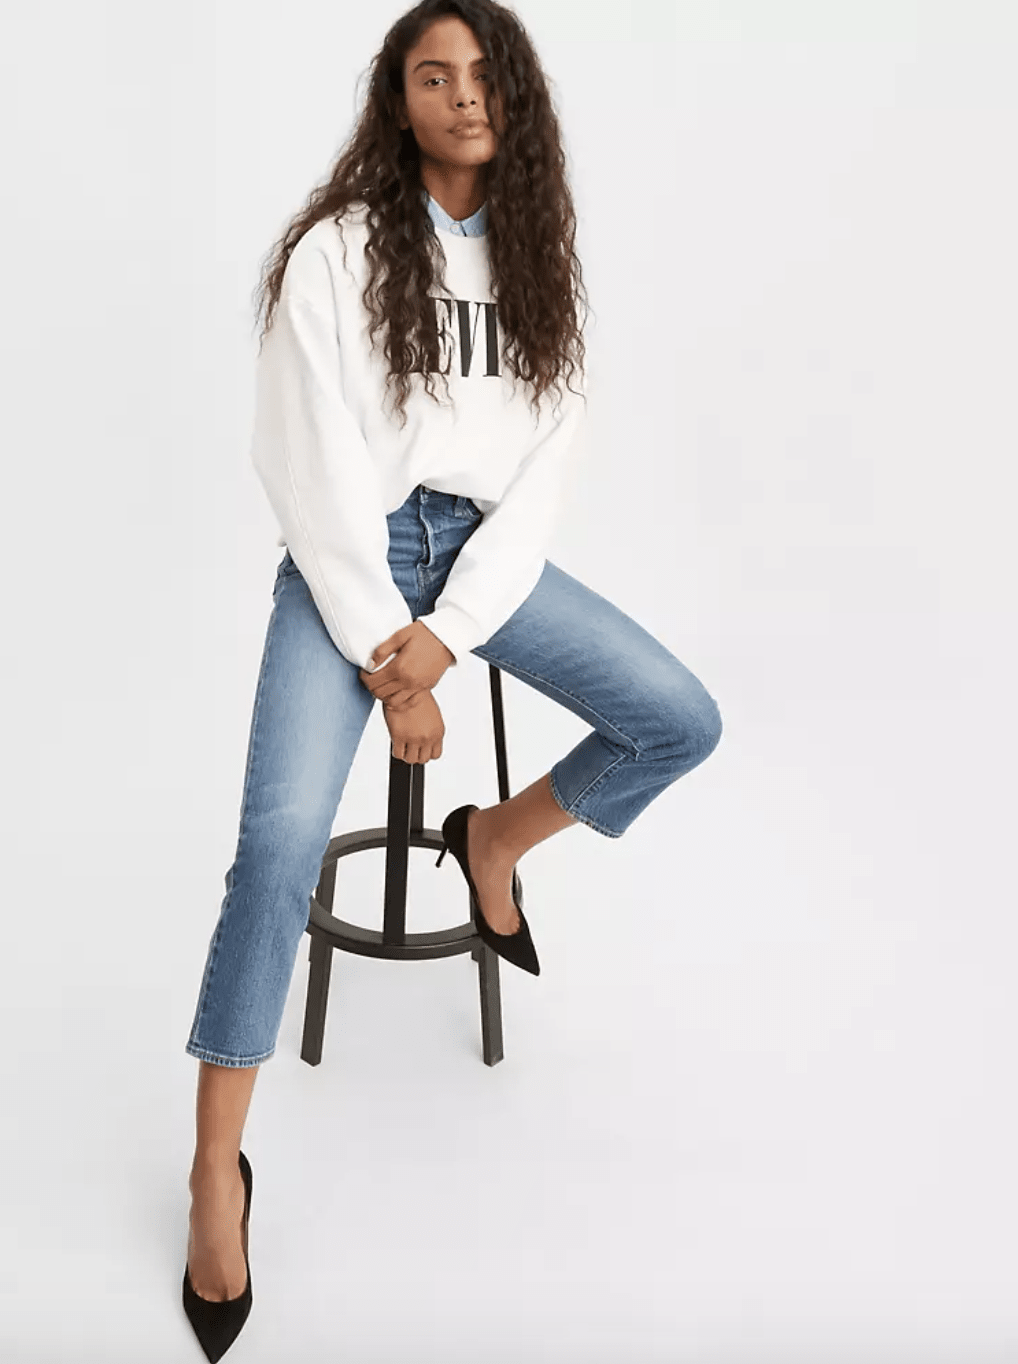 Black deals on jeans from Levi's, Madewell, Old and more top denim brands